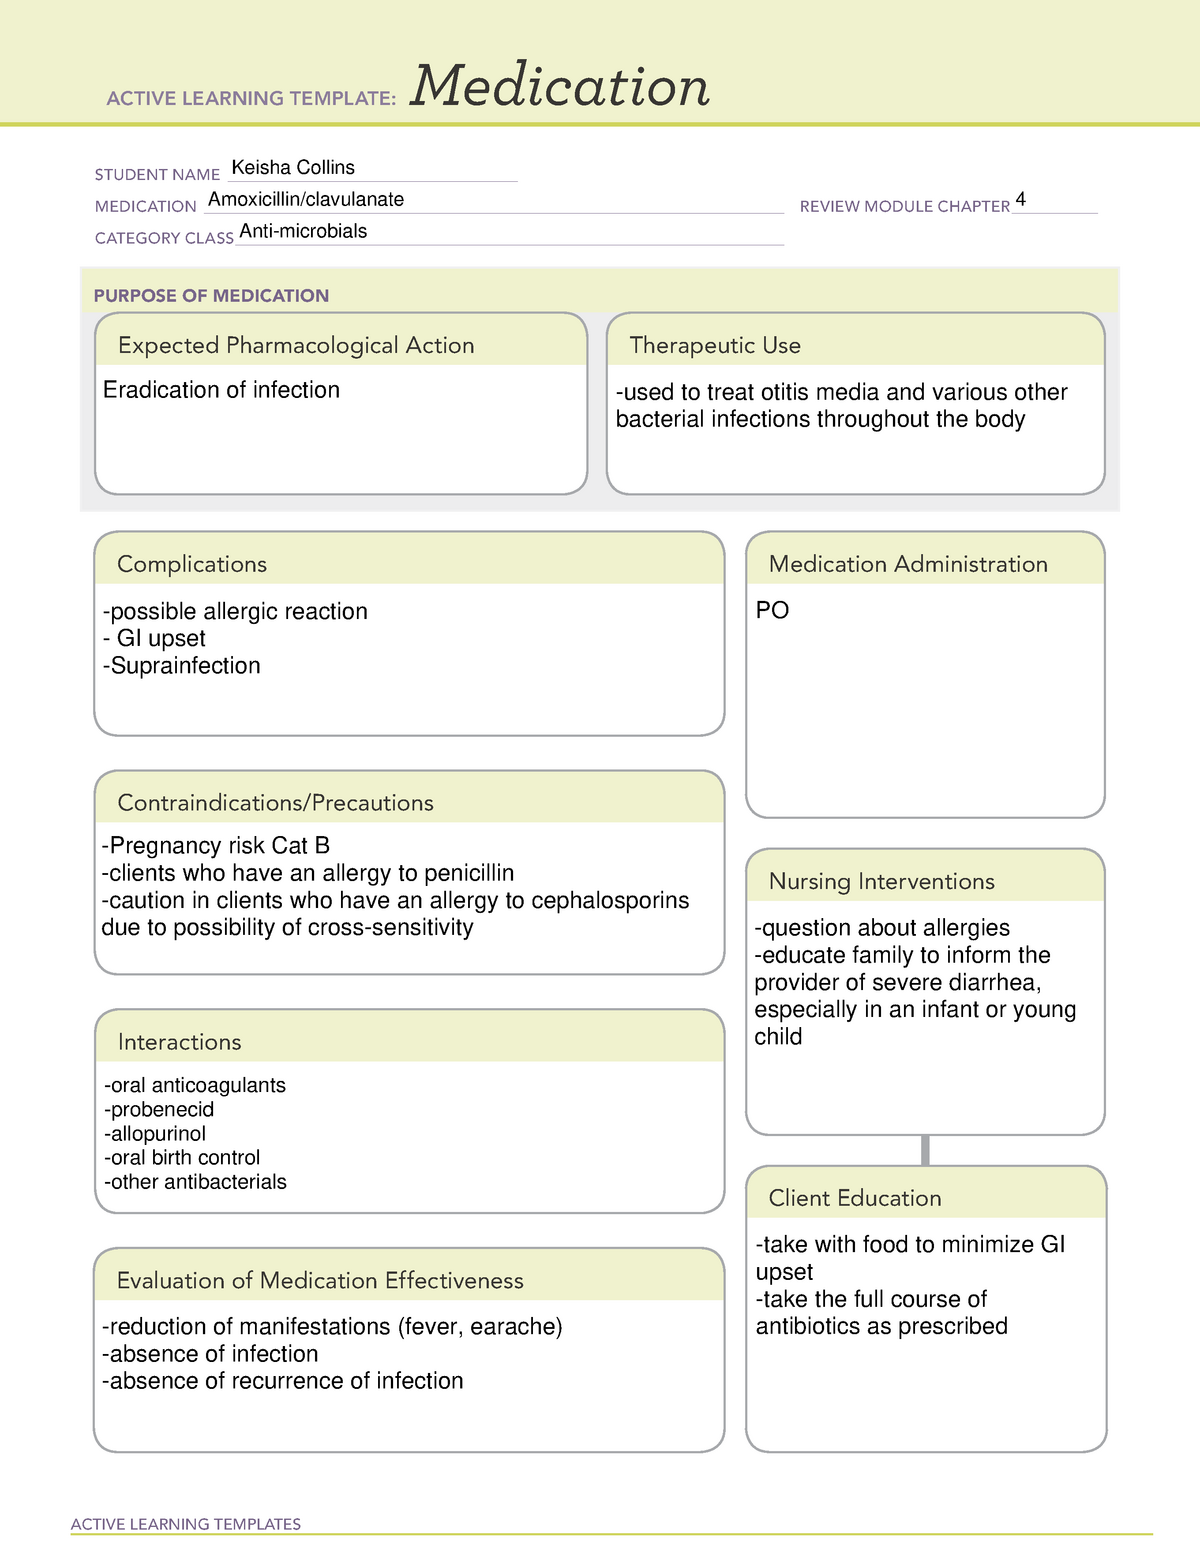 Amoxicillin template ACTIVE LEARNING TEMPLATES Medication STUDENT